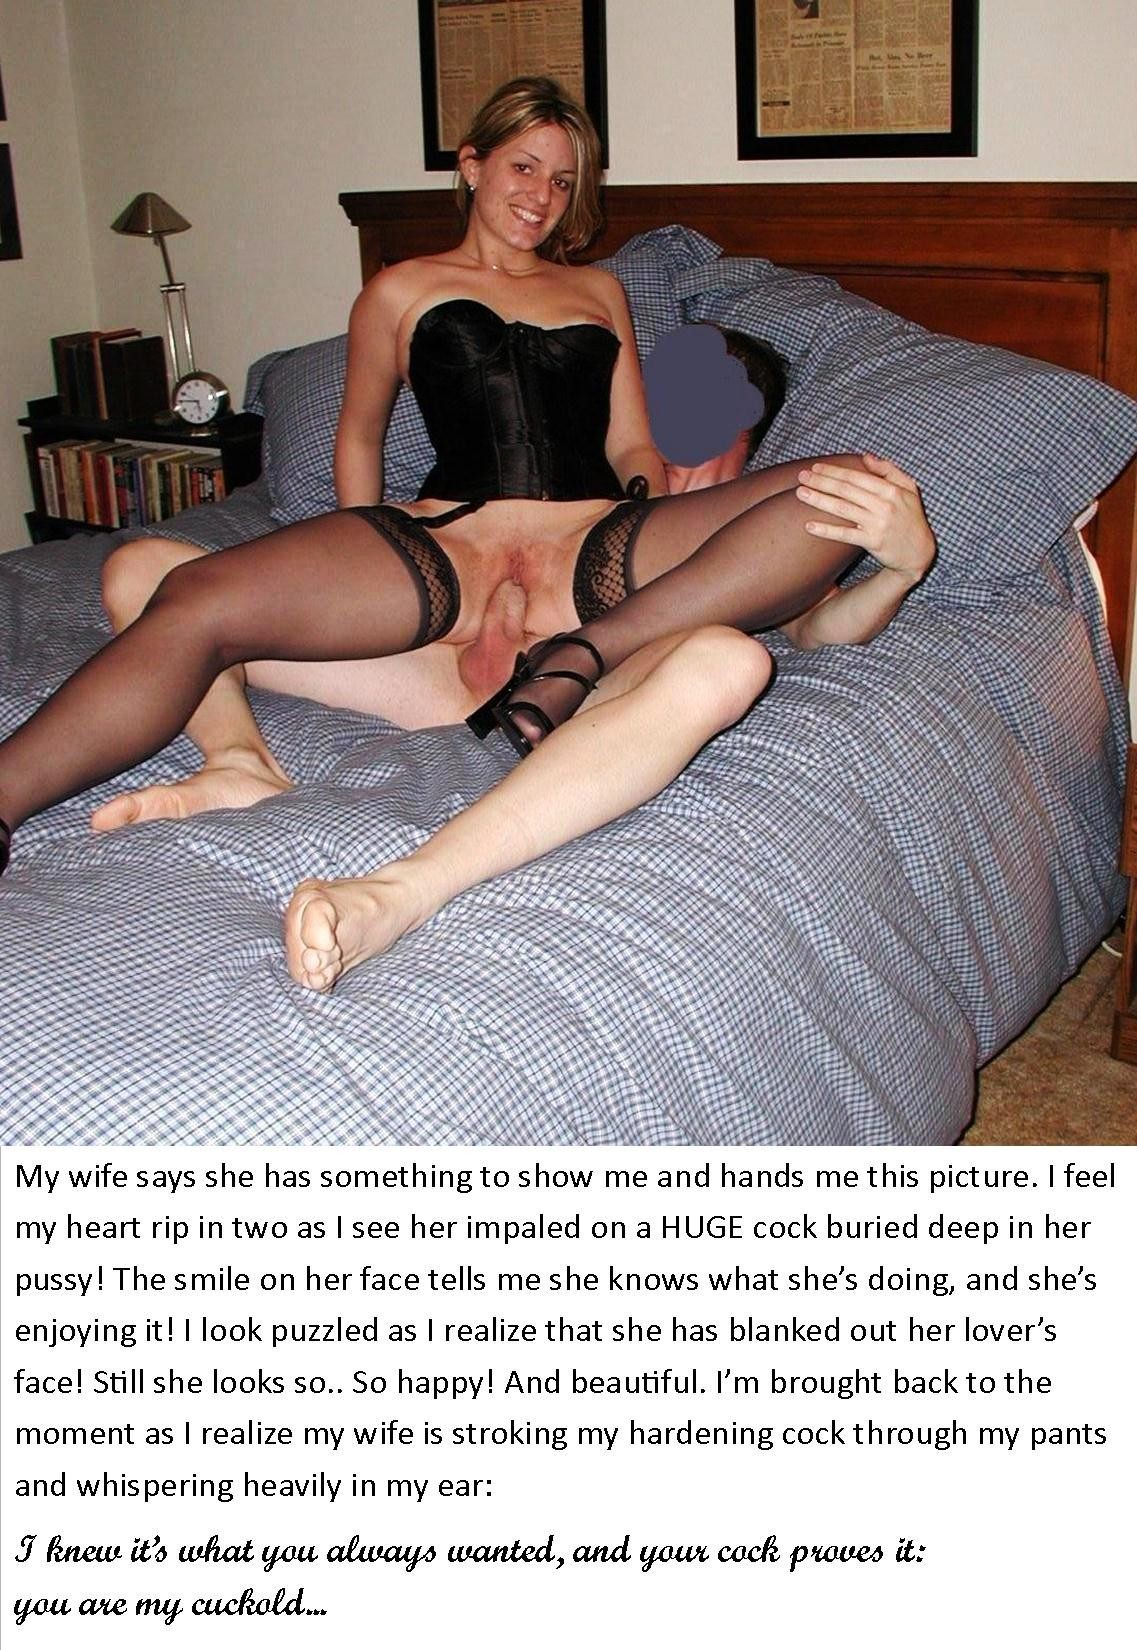 Husband watches wife amateur pic